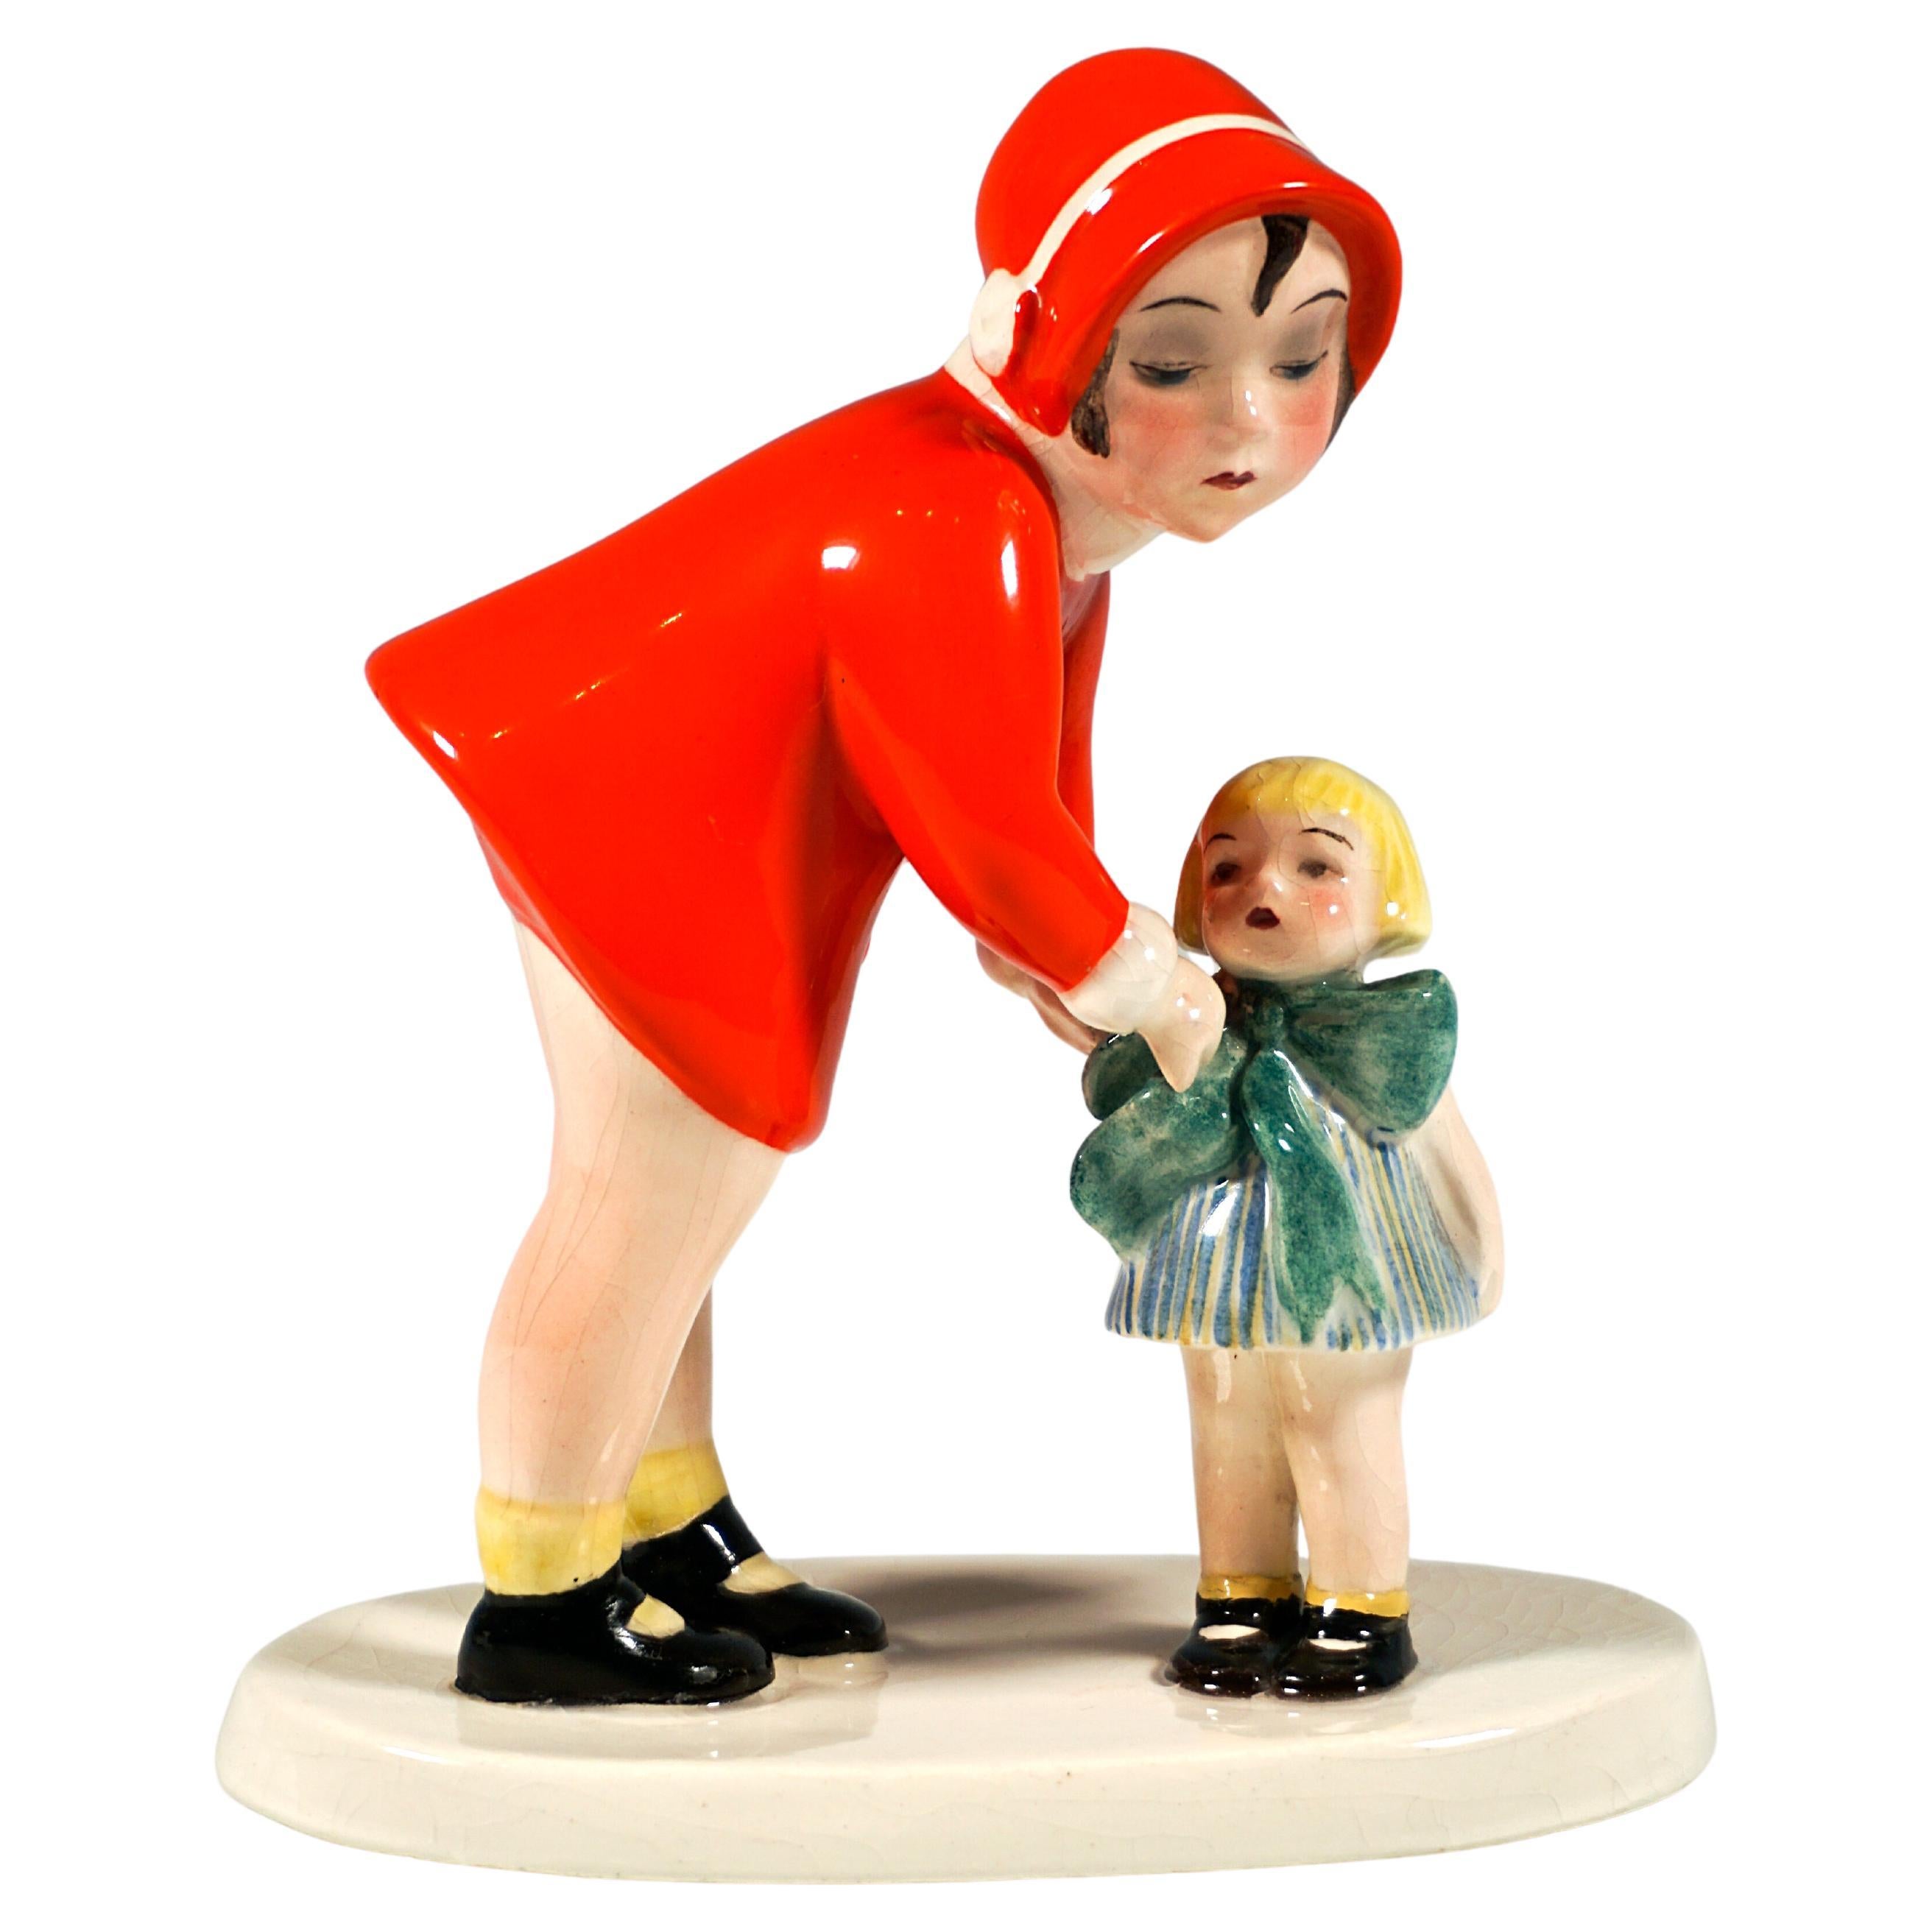 Rare Goldscheider Vienna Figurine, Girl With Doll, by Claire Weiss, circa 1934 For Sale